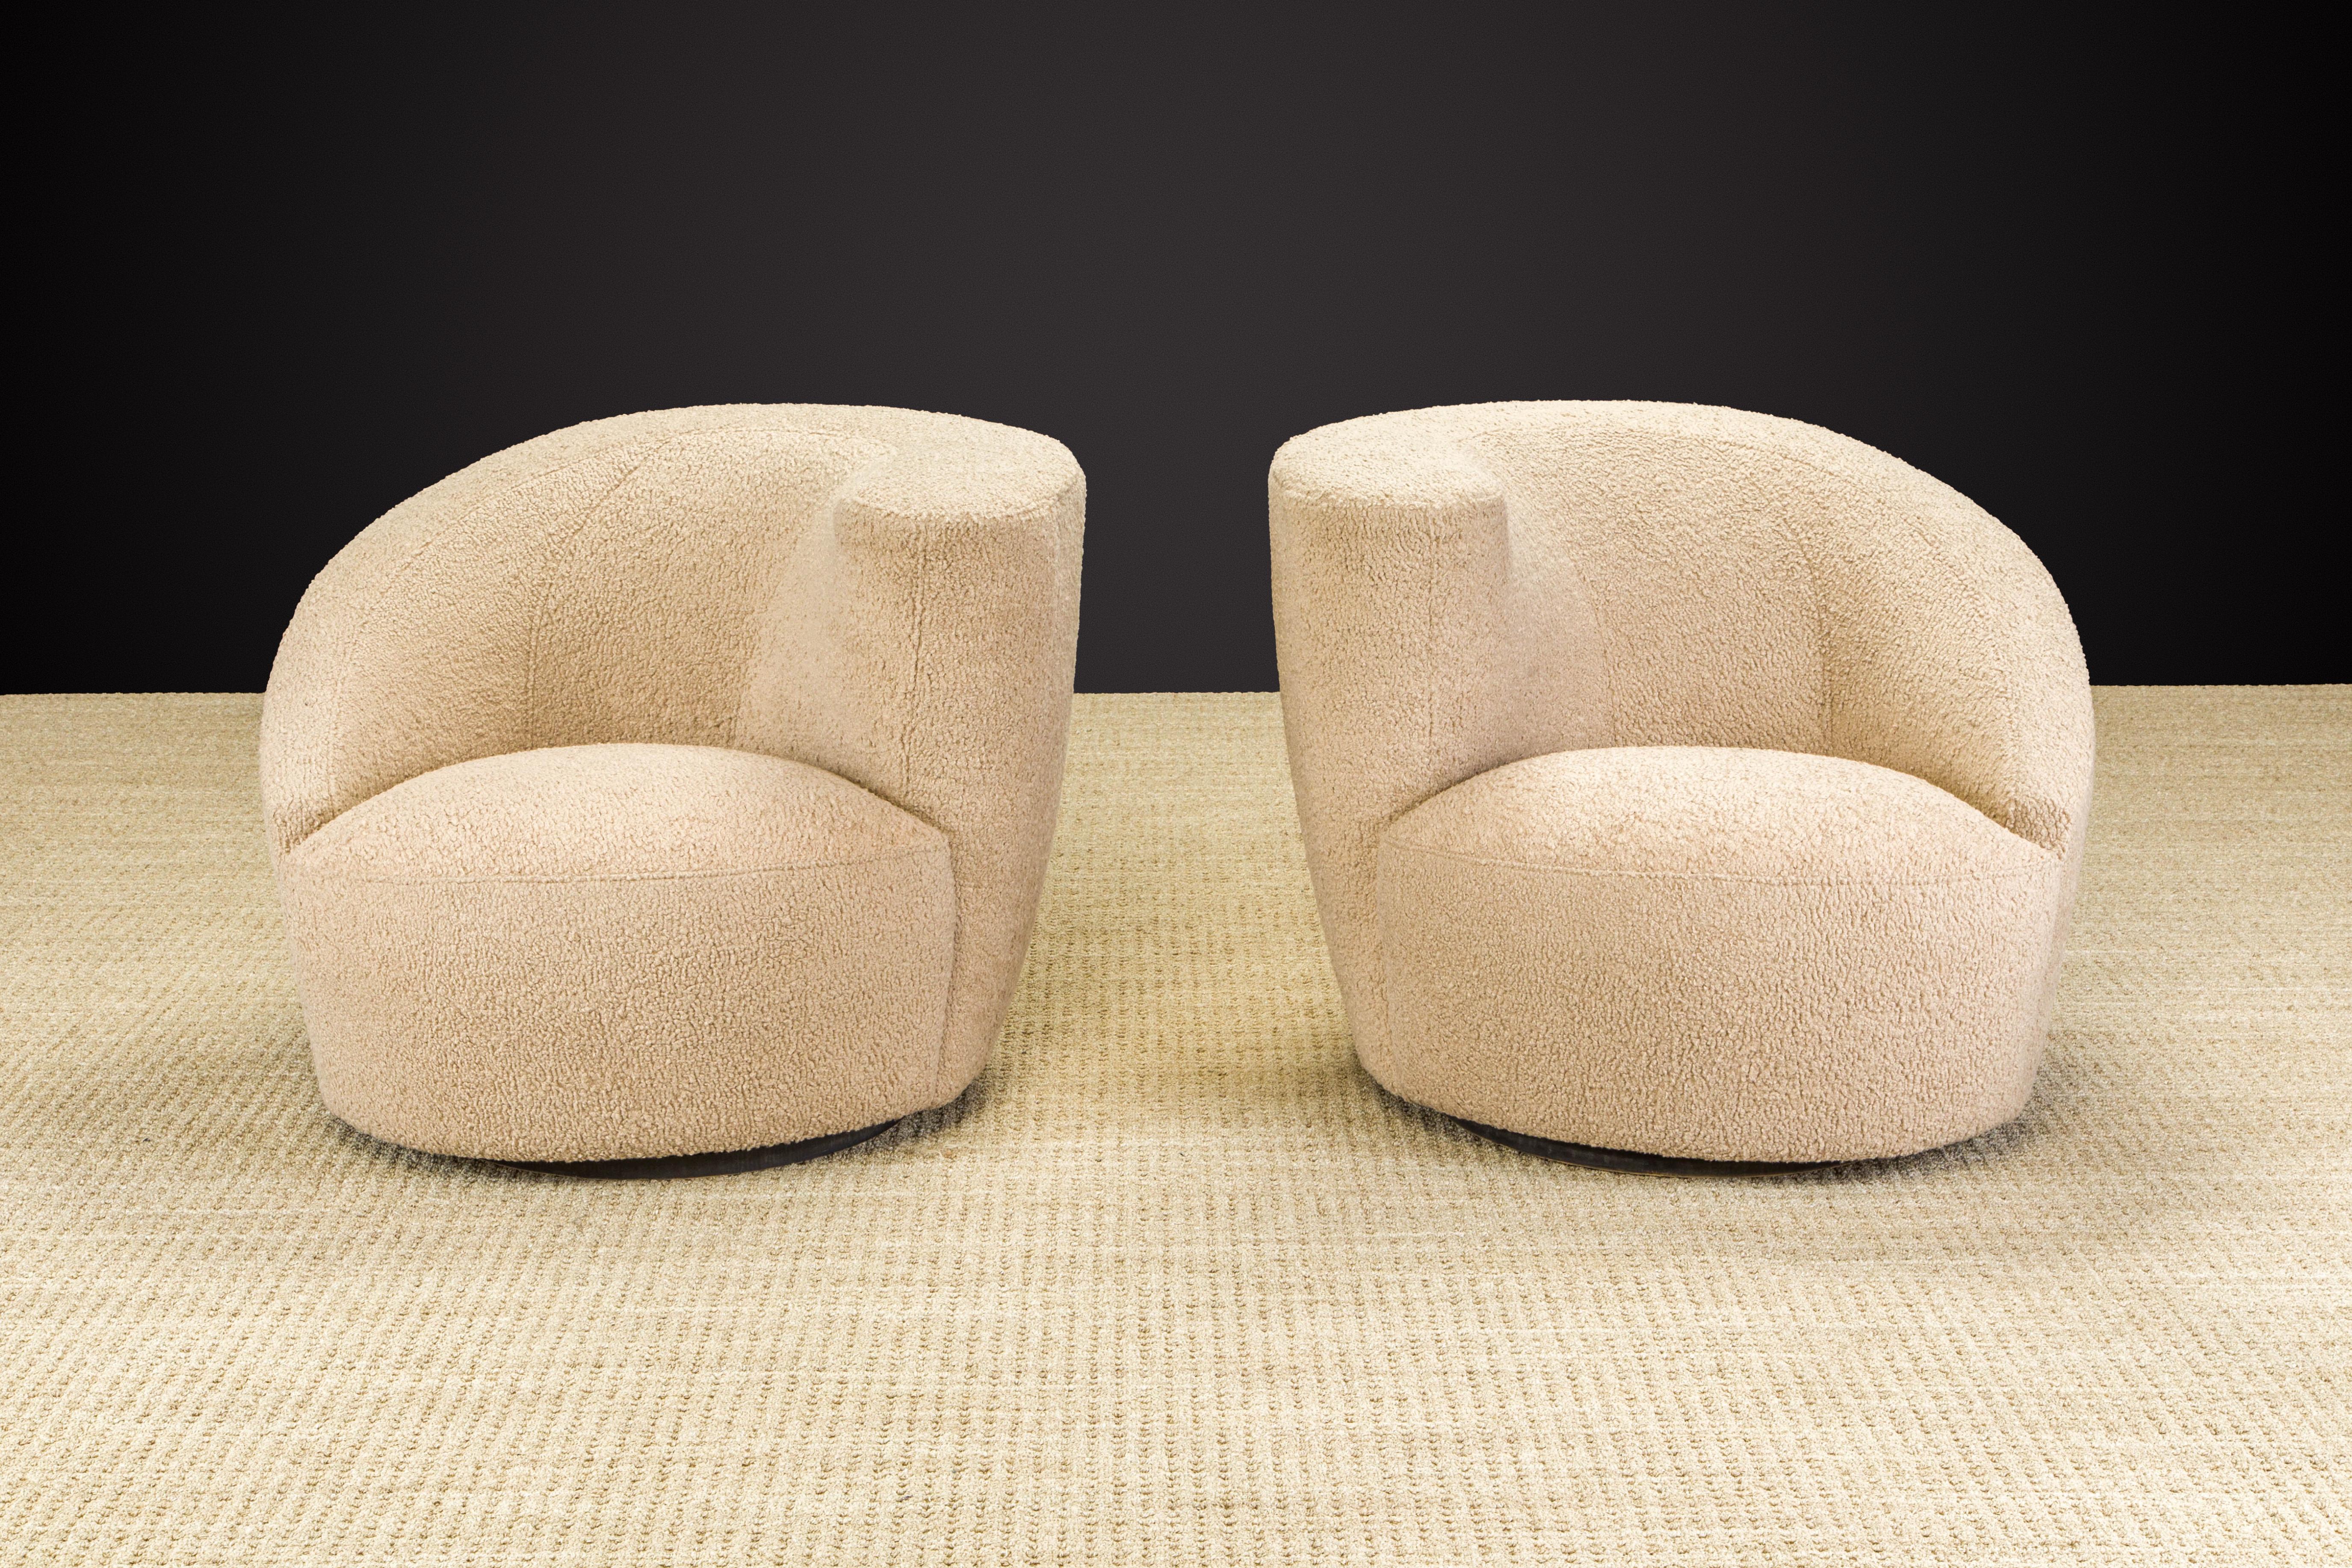 American Vladimir Kagan Pair of Corkscrew Swivel Chairs for Directional in Bouclé, Signed